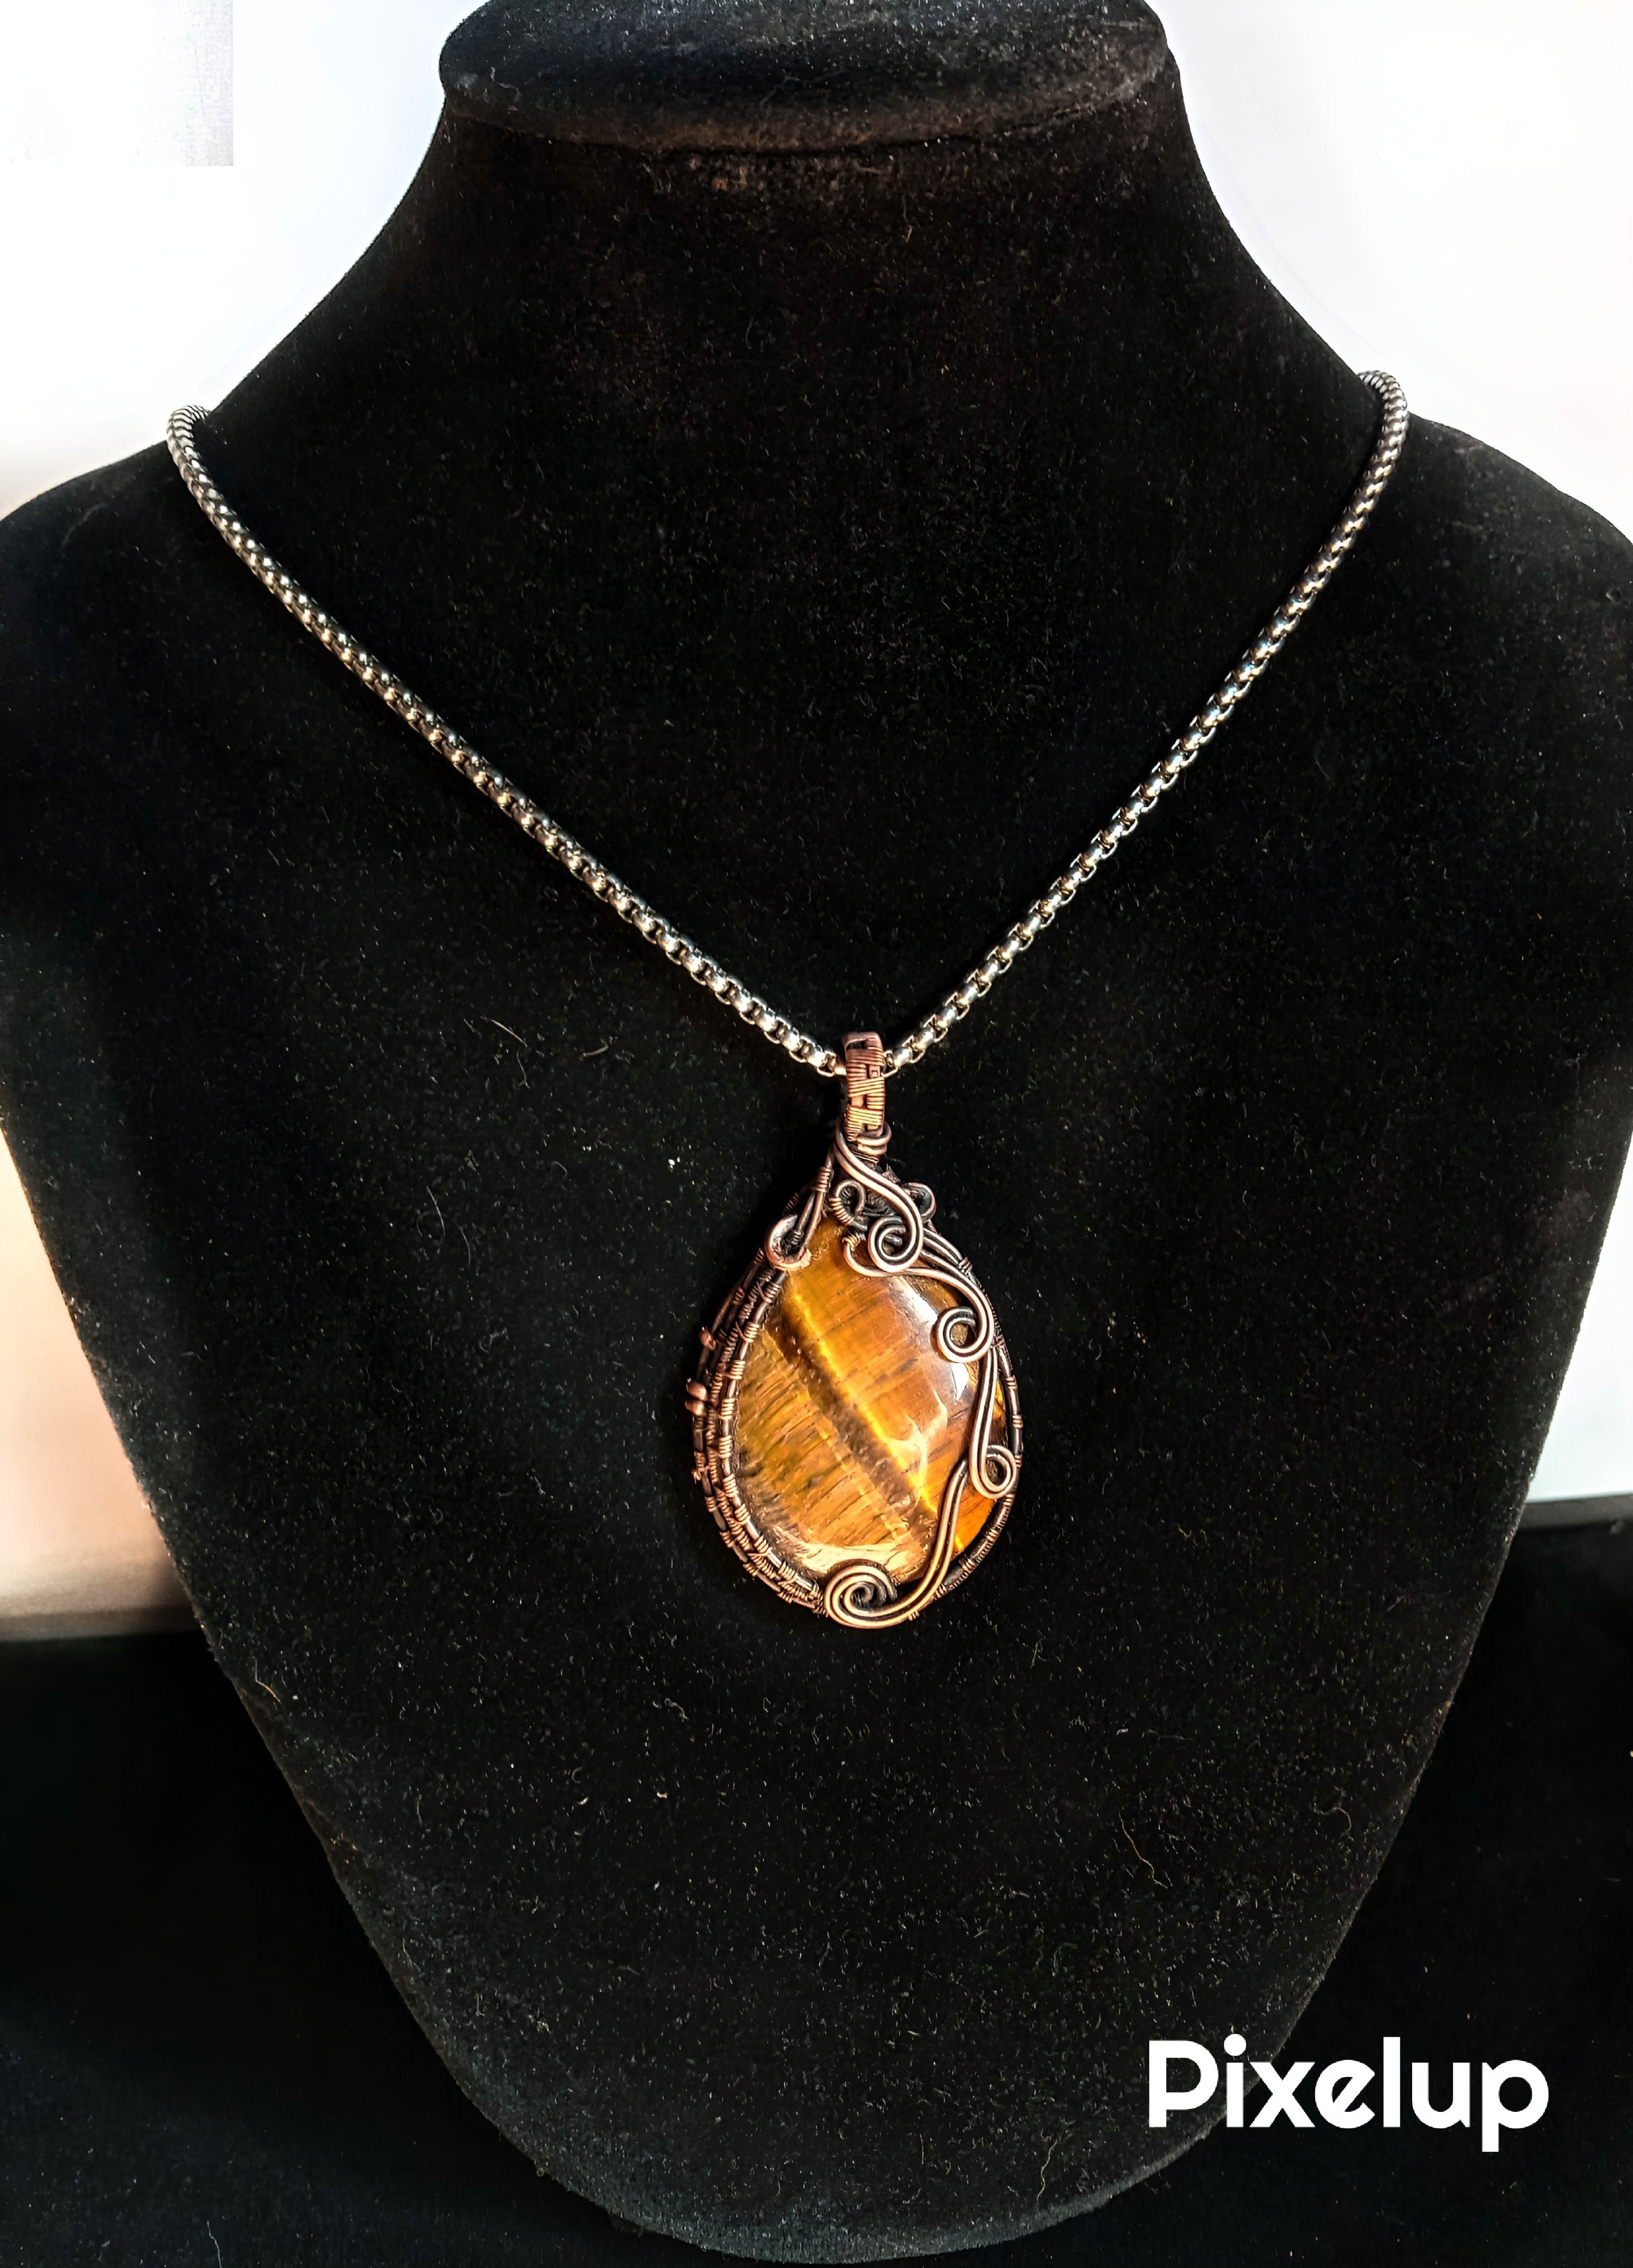 Tiger Eye Wire Wrap Magnetite Magnetic Necklace